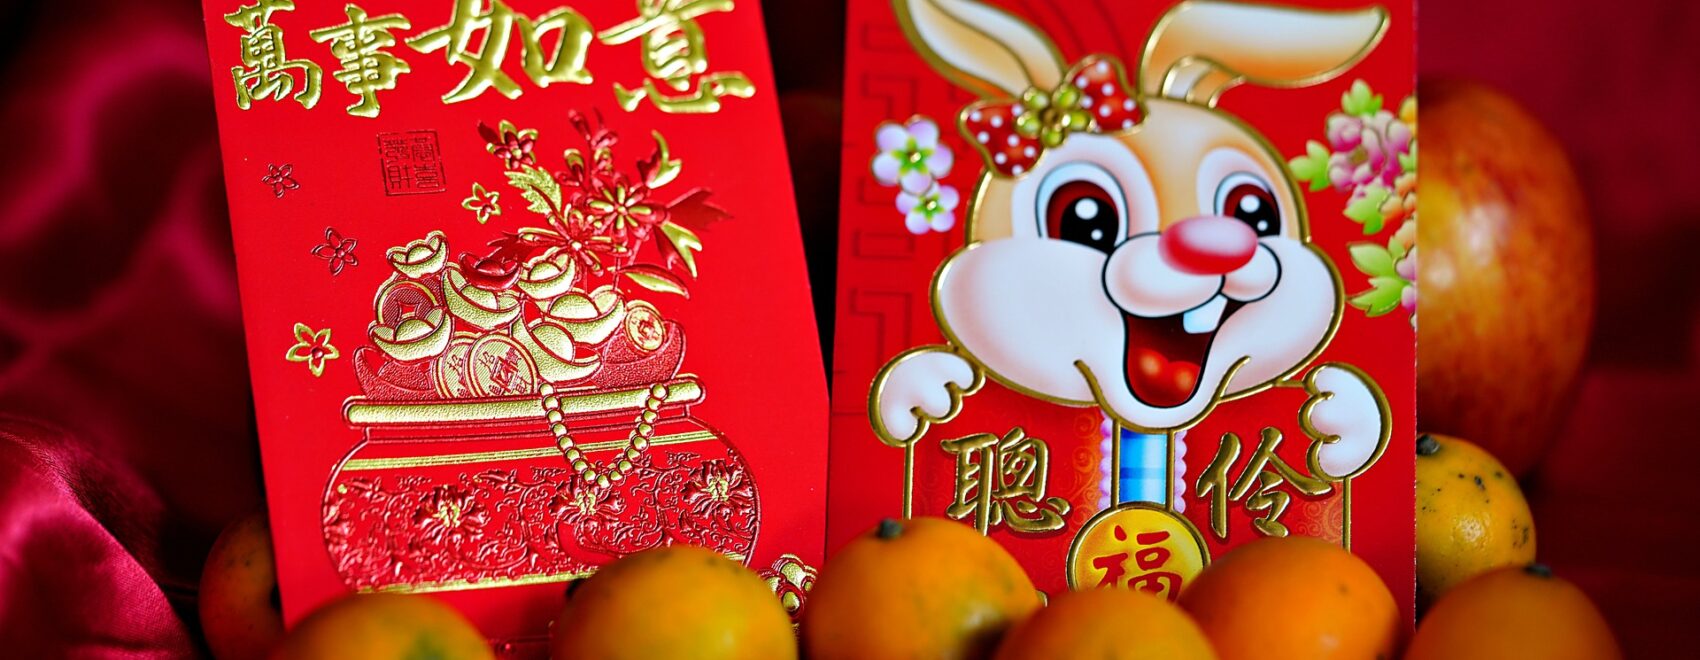 year of the rabbit red envelope and oranges by hartono subagio on pixabay